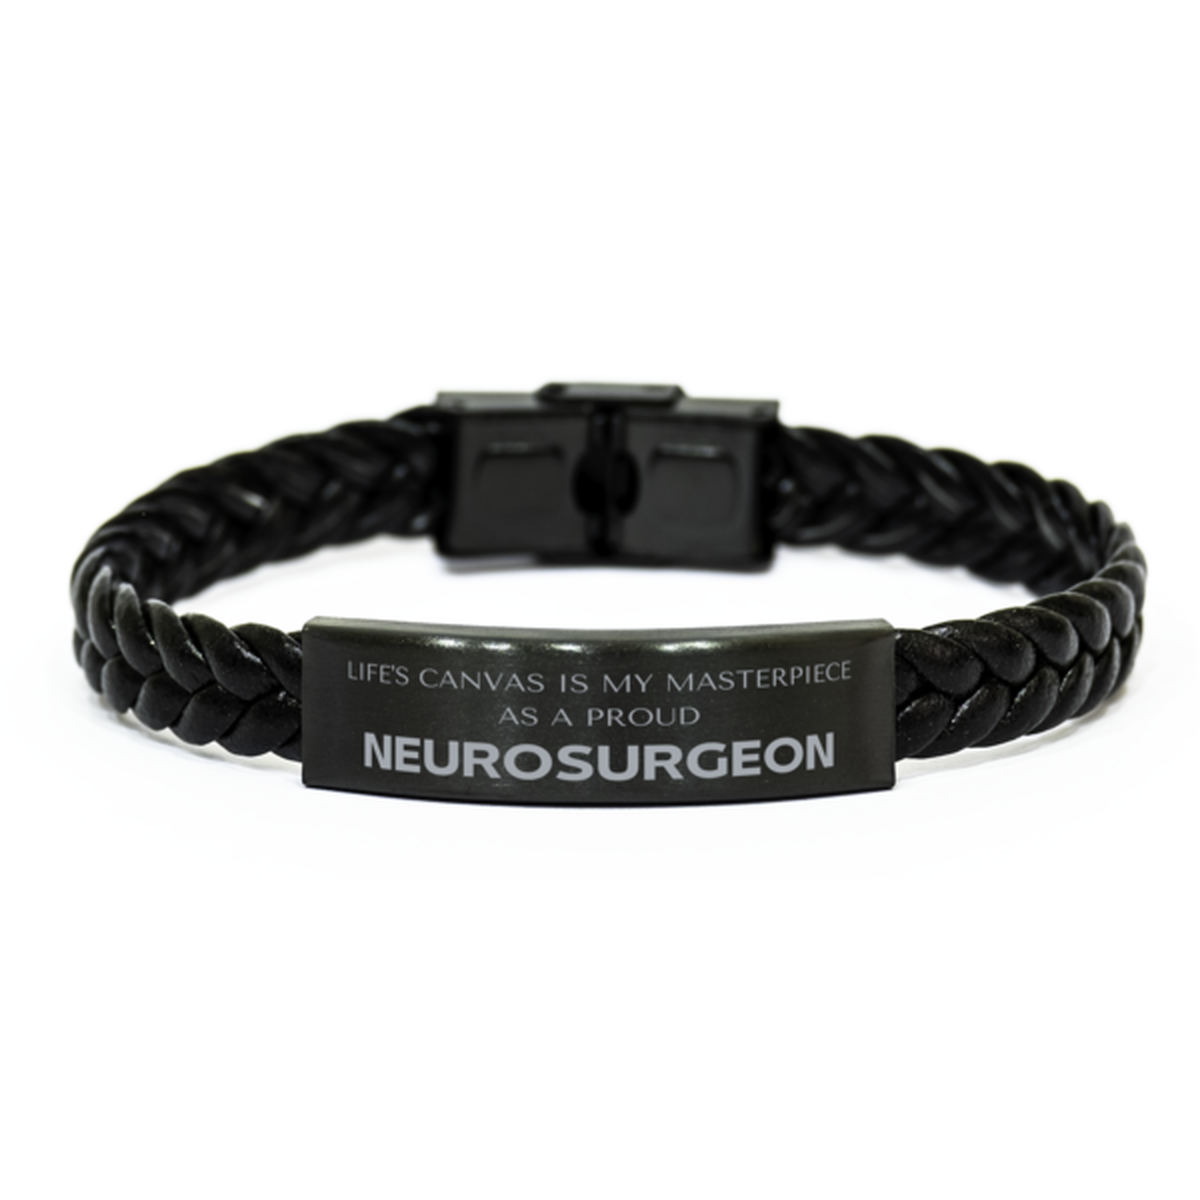 Proud Neurosurgeon Gifts, Life's canvas is my masterpiece, Epic Birthday Christmas Unique Braided Leather Bracelet For Neurosurgeon, Coworkers, Men, Women, Friends